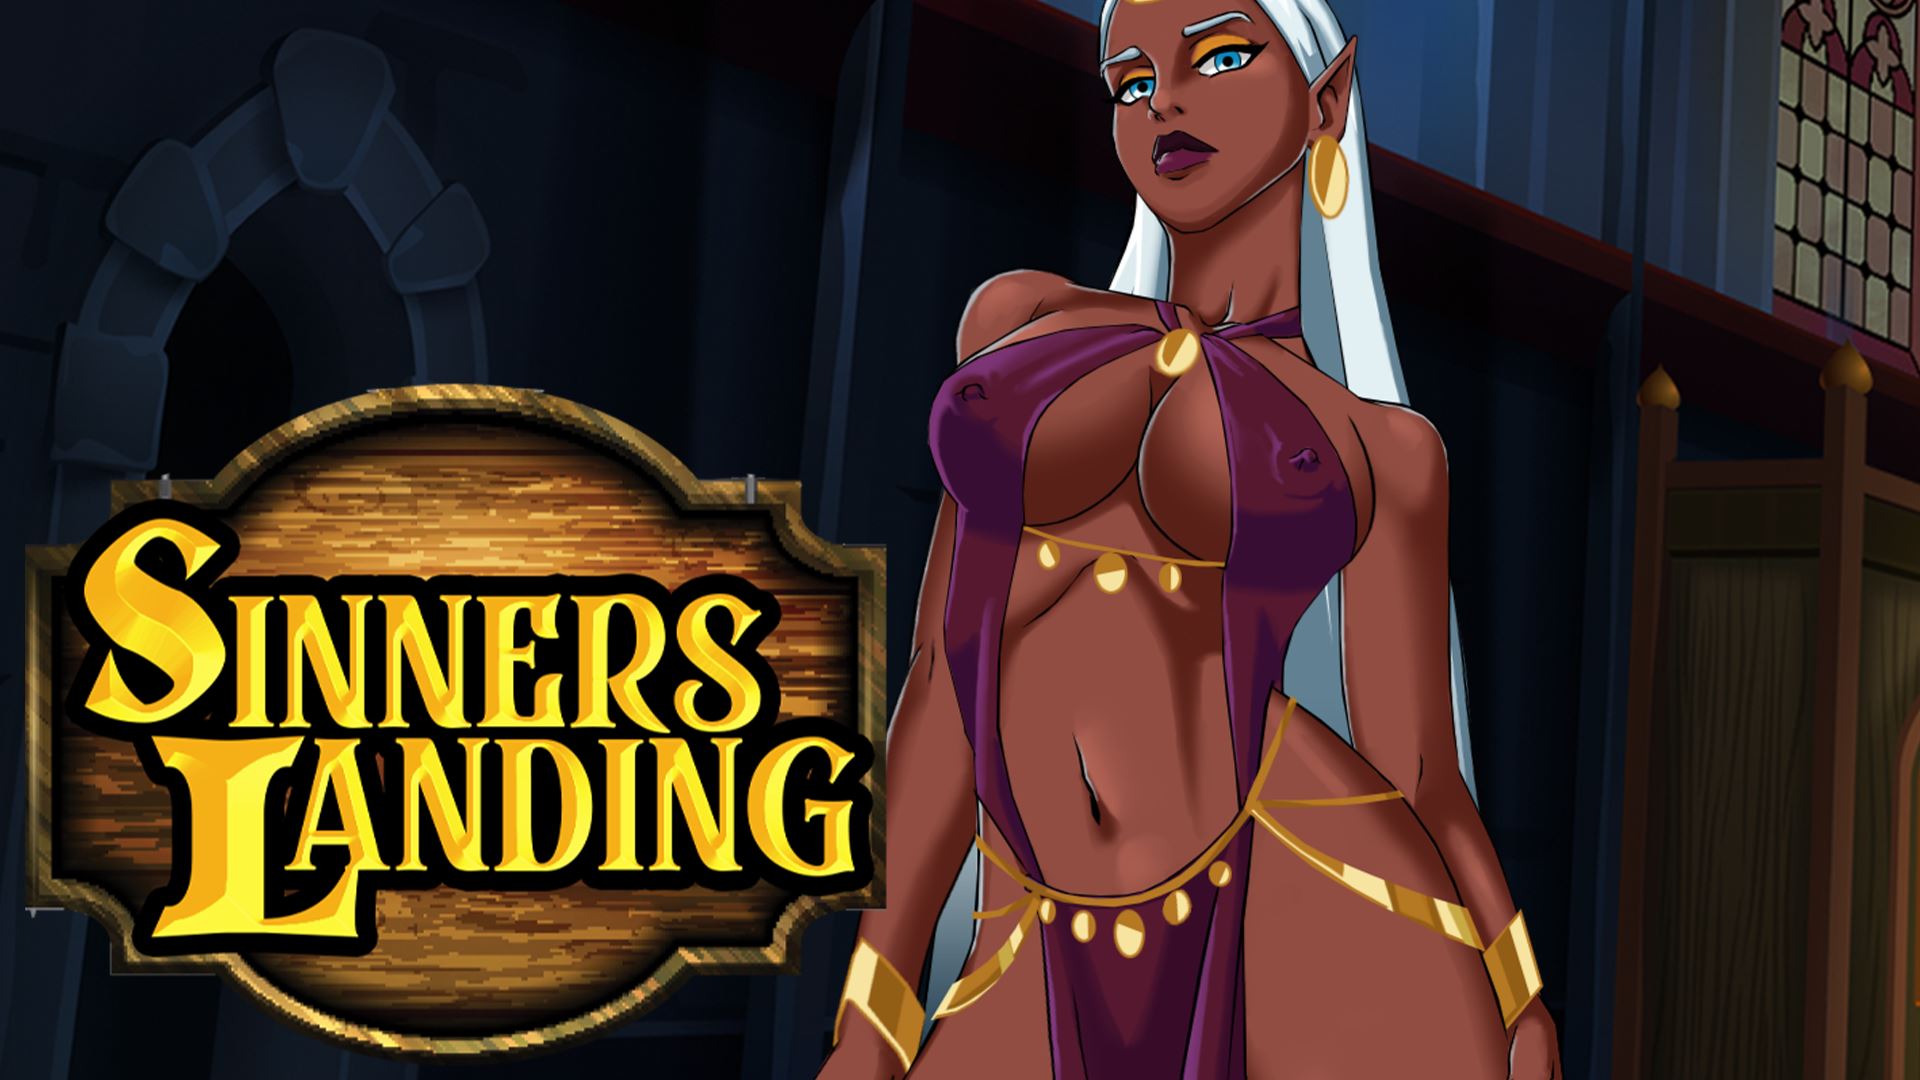 Sinners Landing porn xxx game download cover